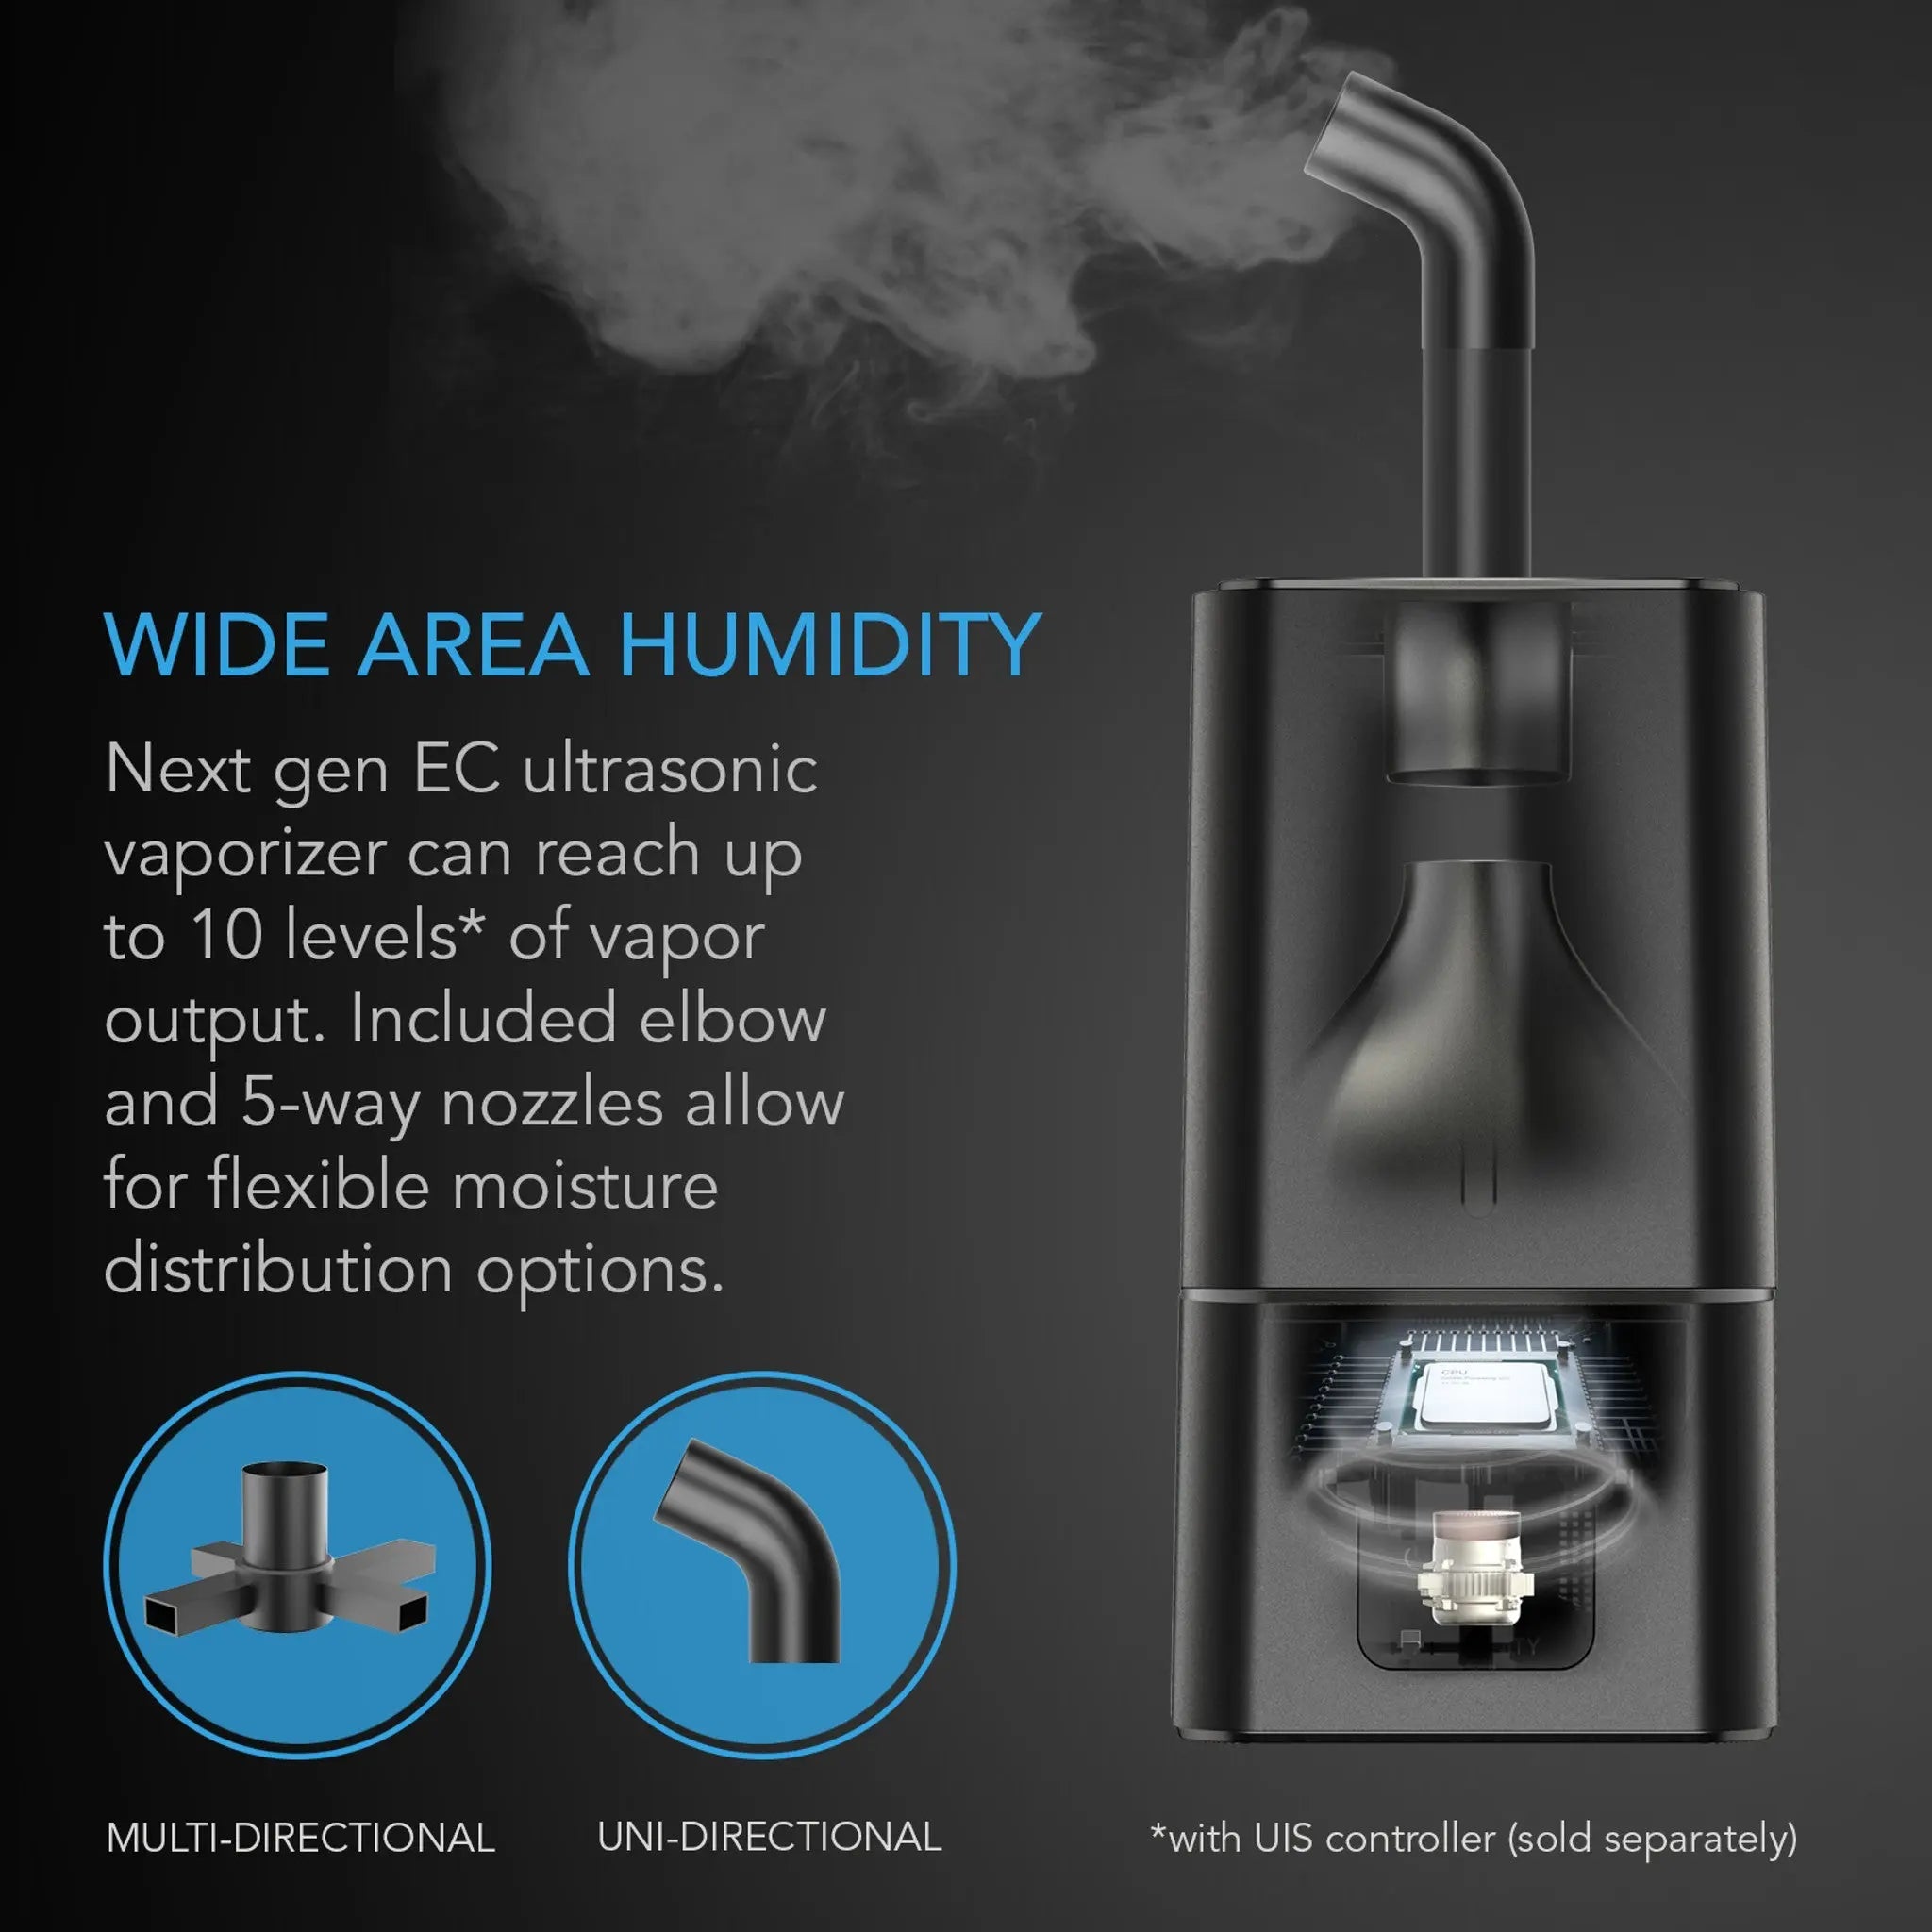 AC Infinity CLOUDFORGE T7, ENVIRONMENTAL PLANT HUMIDIFIER, 15L, SMART CONTROLS, TARGETED VAPORIZING AC Infinity